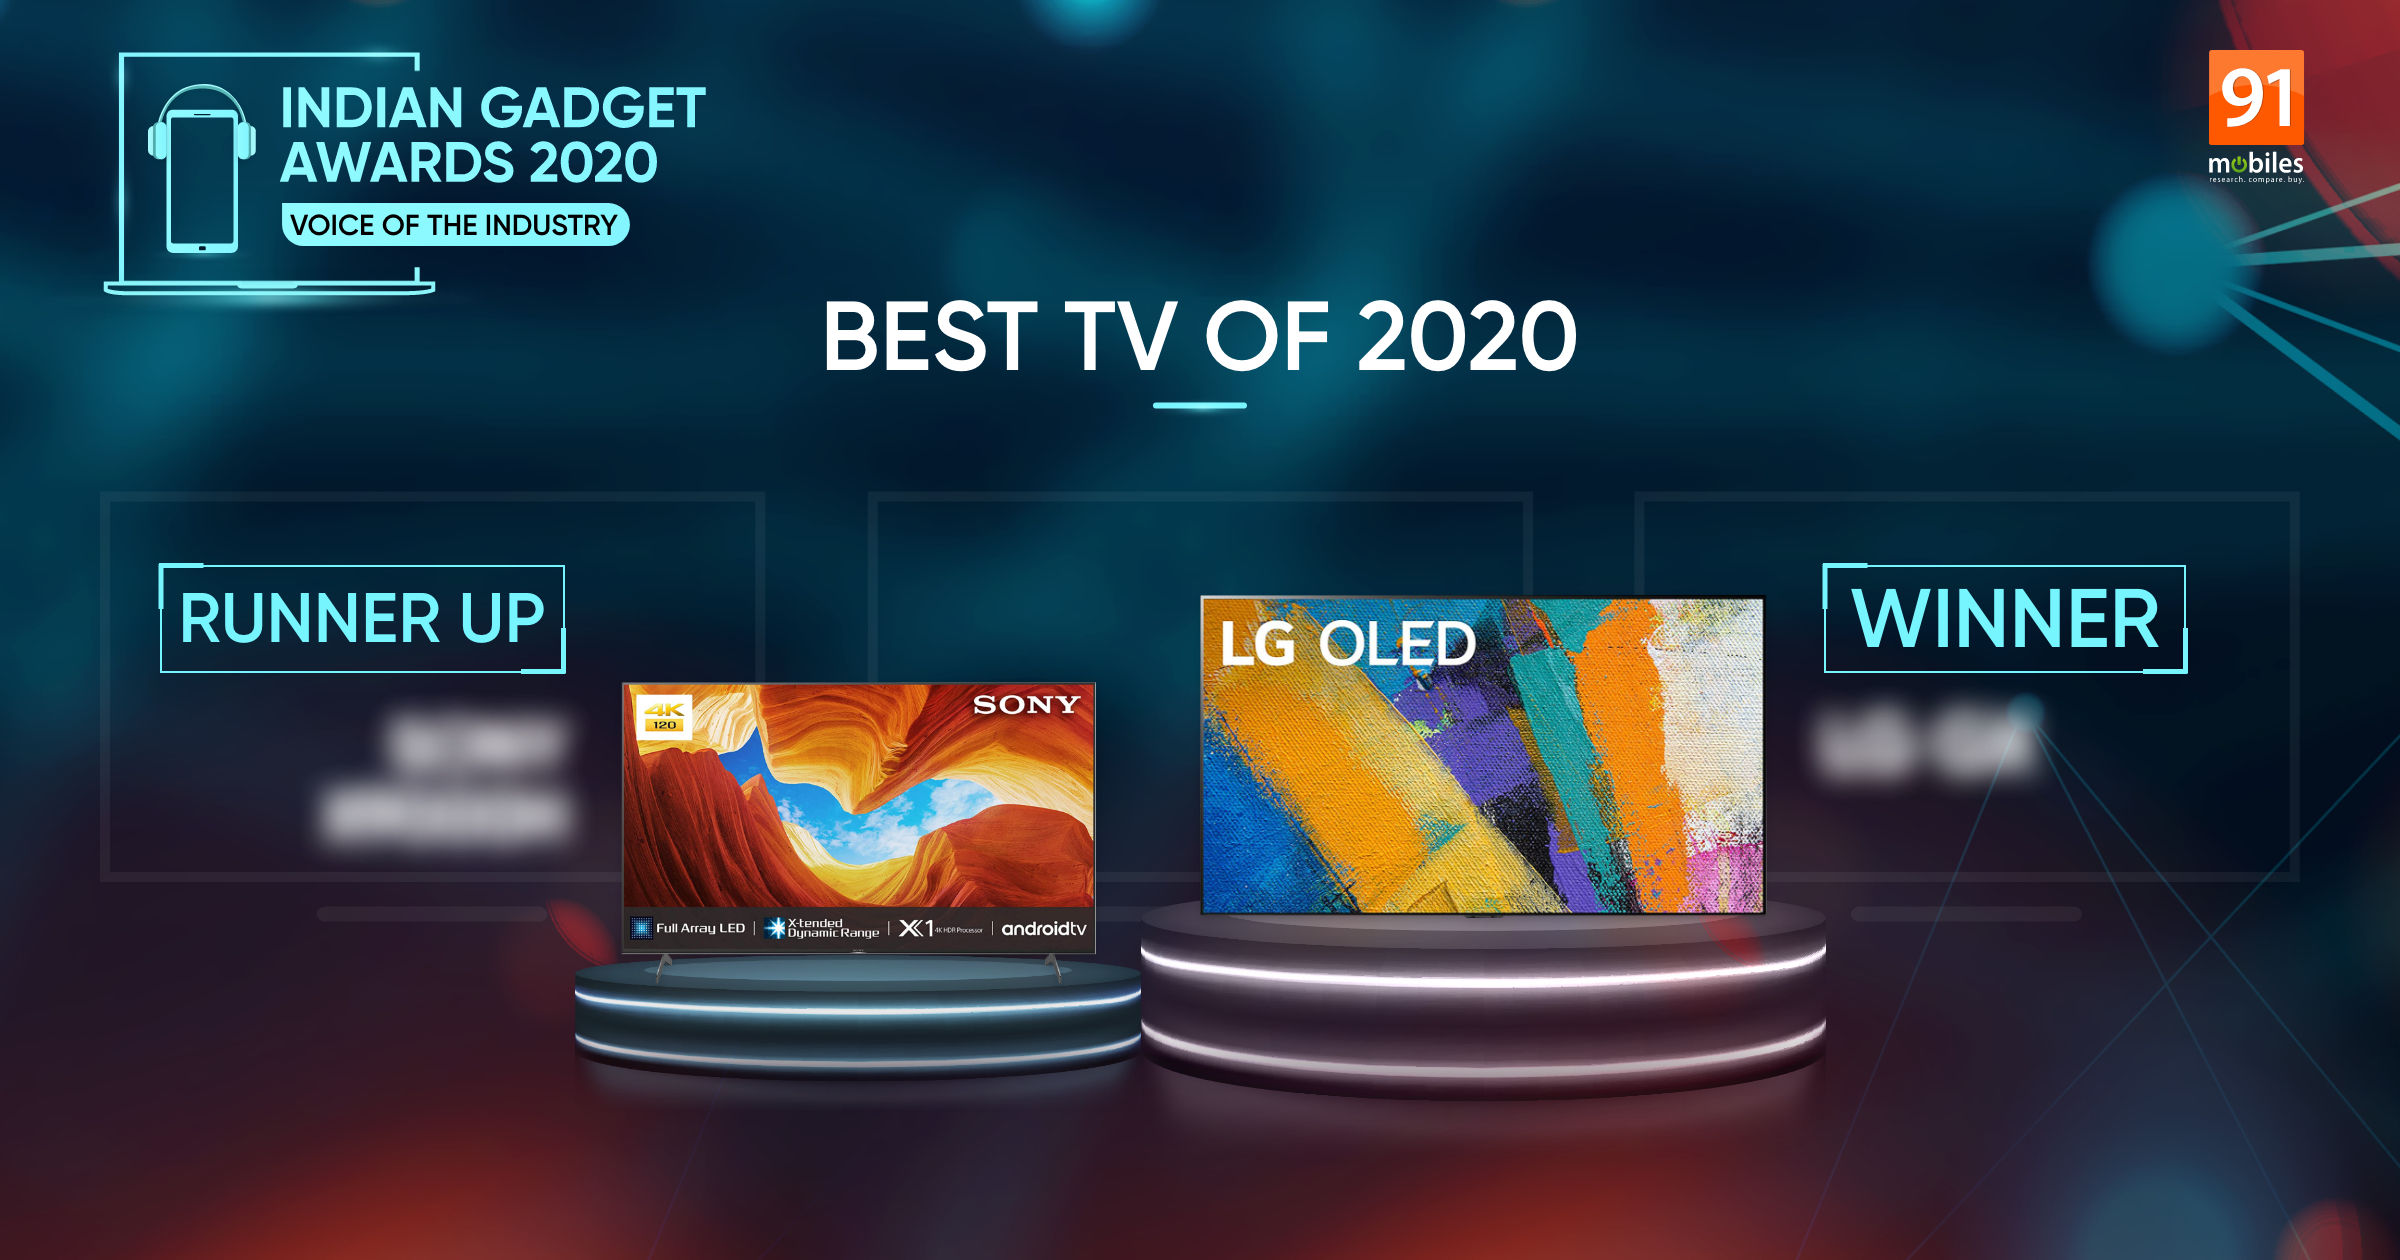 Indian Gadget Awards — Best TV of 2020: can LG pip Sony to the title?